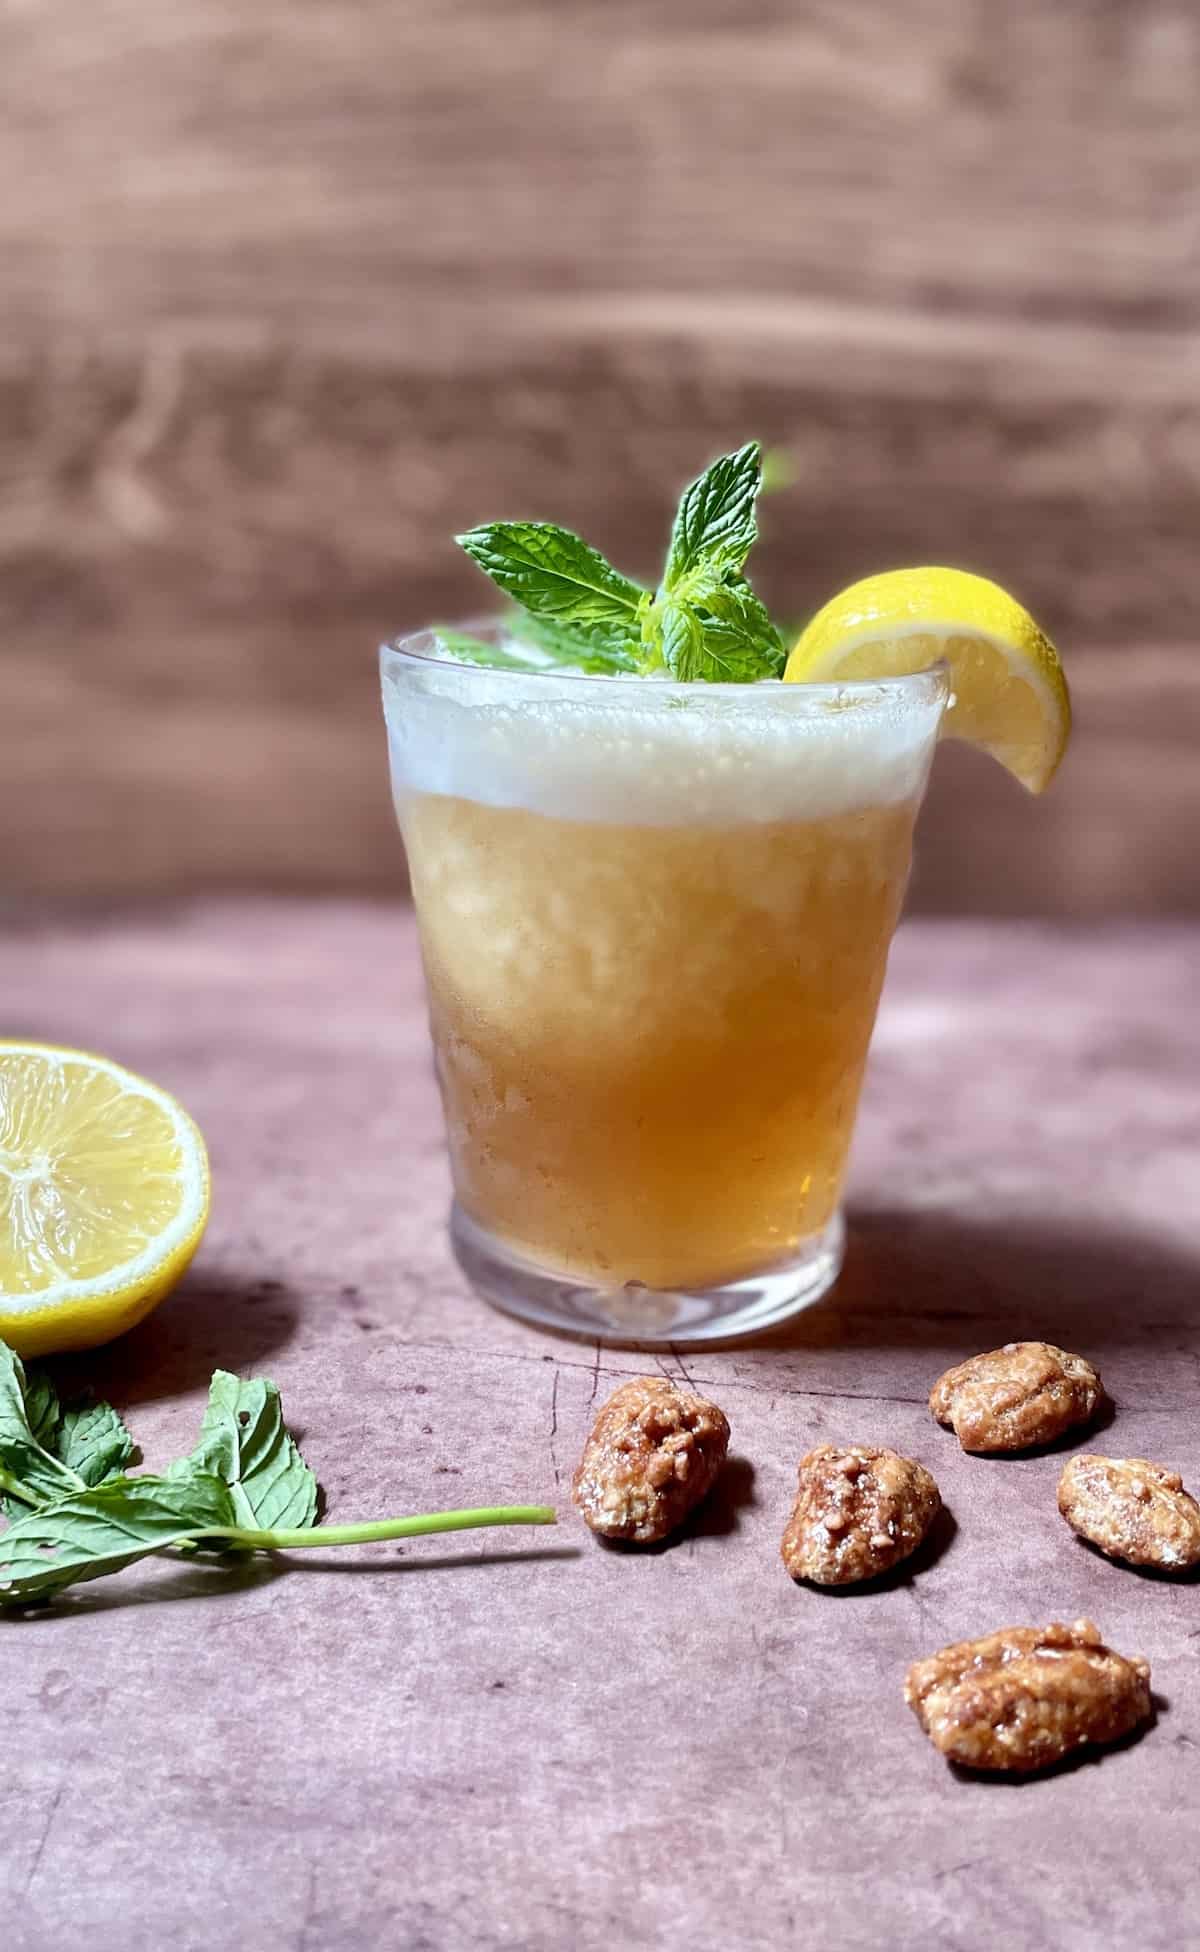 Whiskey slush in a glass with lemon and mint.